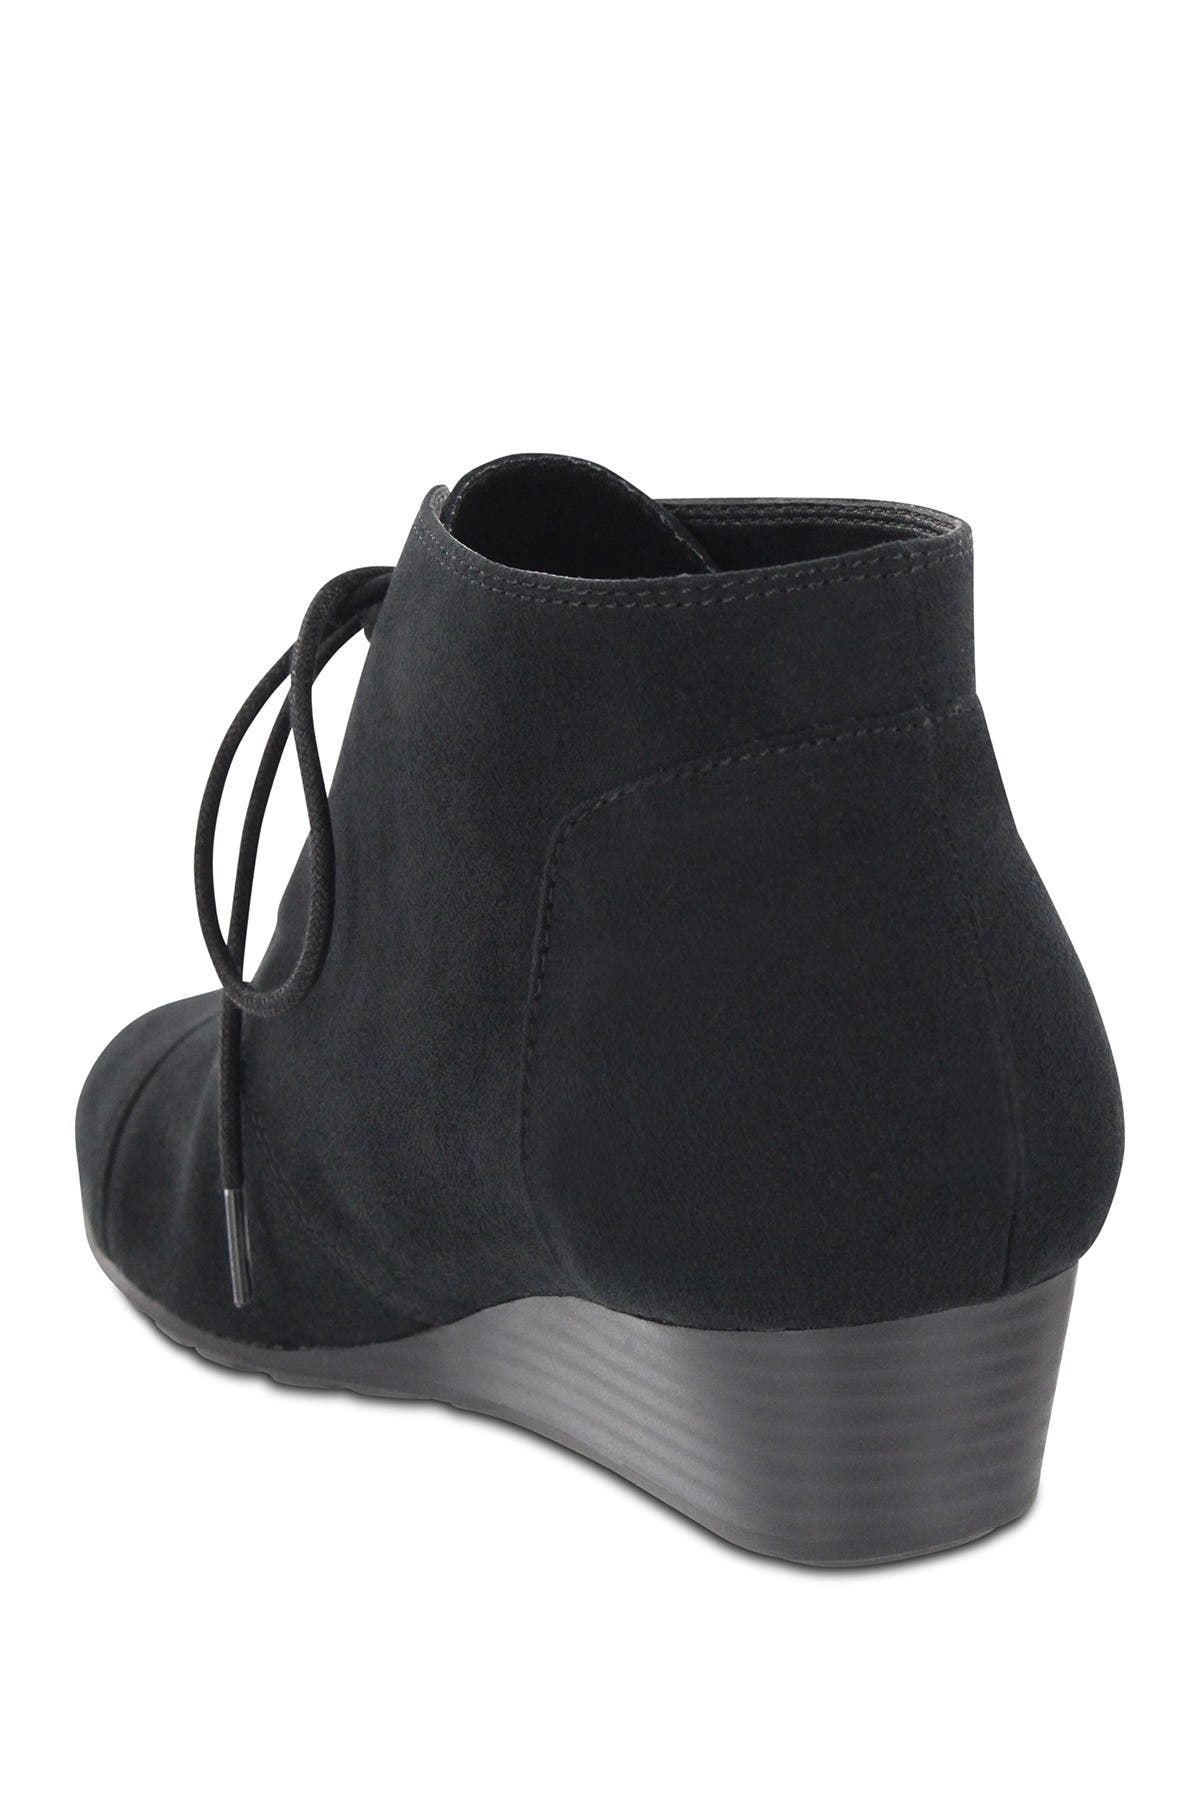 MIA AMORE | Sarah Lace-Up Wedge Bootie 